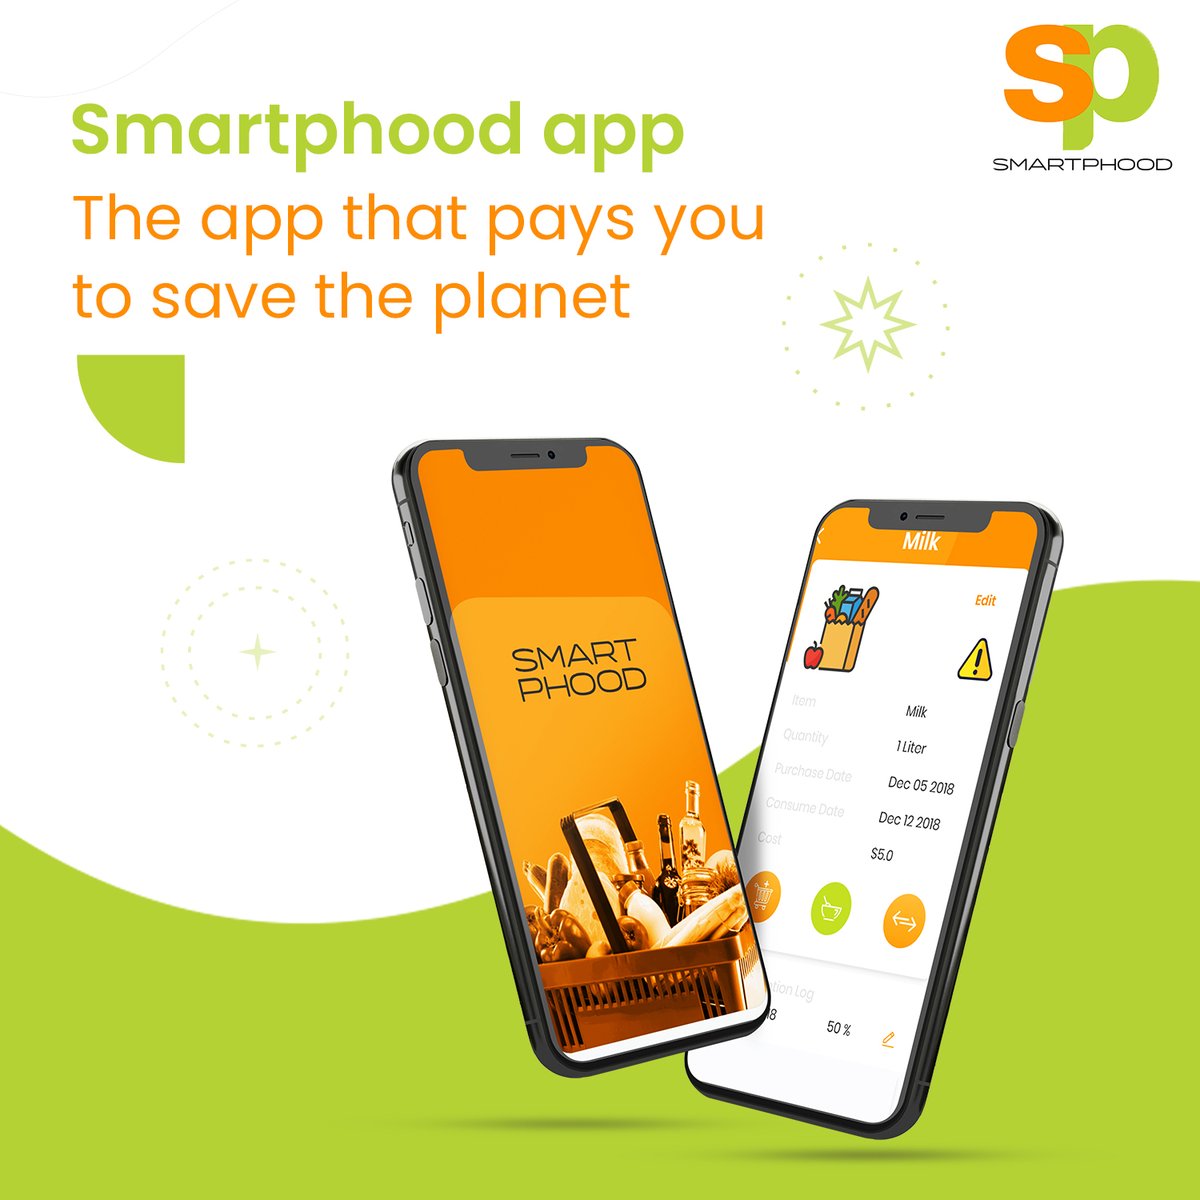 Say goodbye to waste and hello to savings with the Smartphood app. Your wallet and the planet will thank you!

#smartphoodapp #androidapp #iosapp #savemoney #saveenvironment #foodwastagesaving #reducefoodwaste #financemanagement #takecontrol